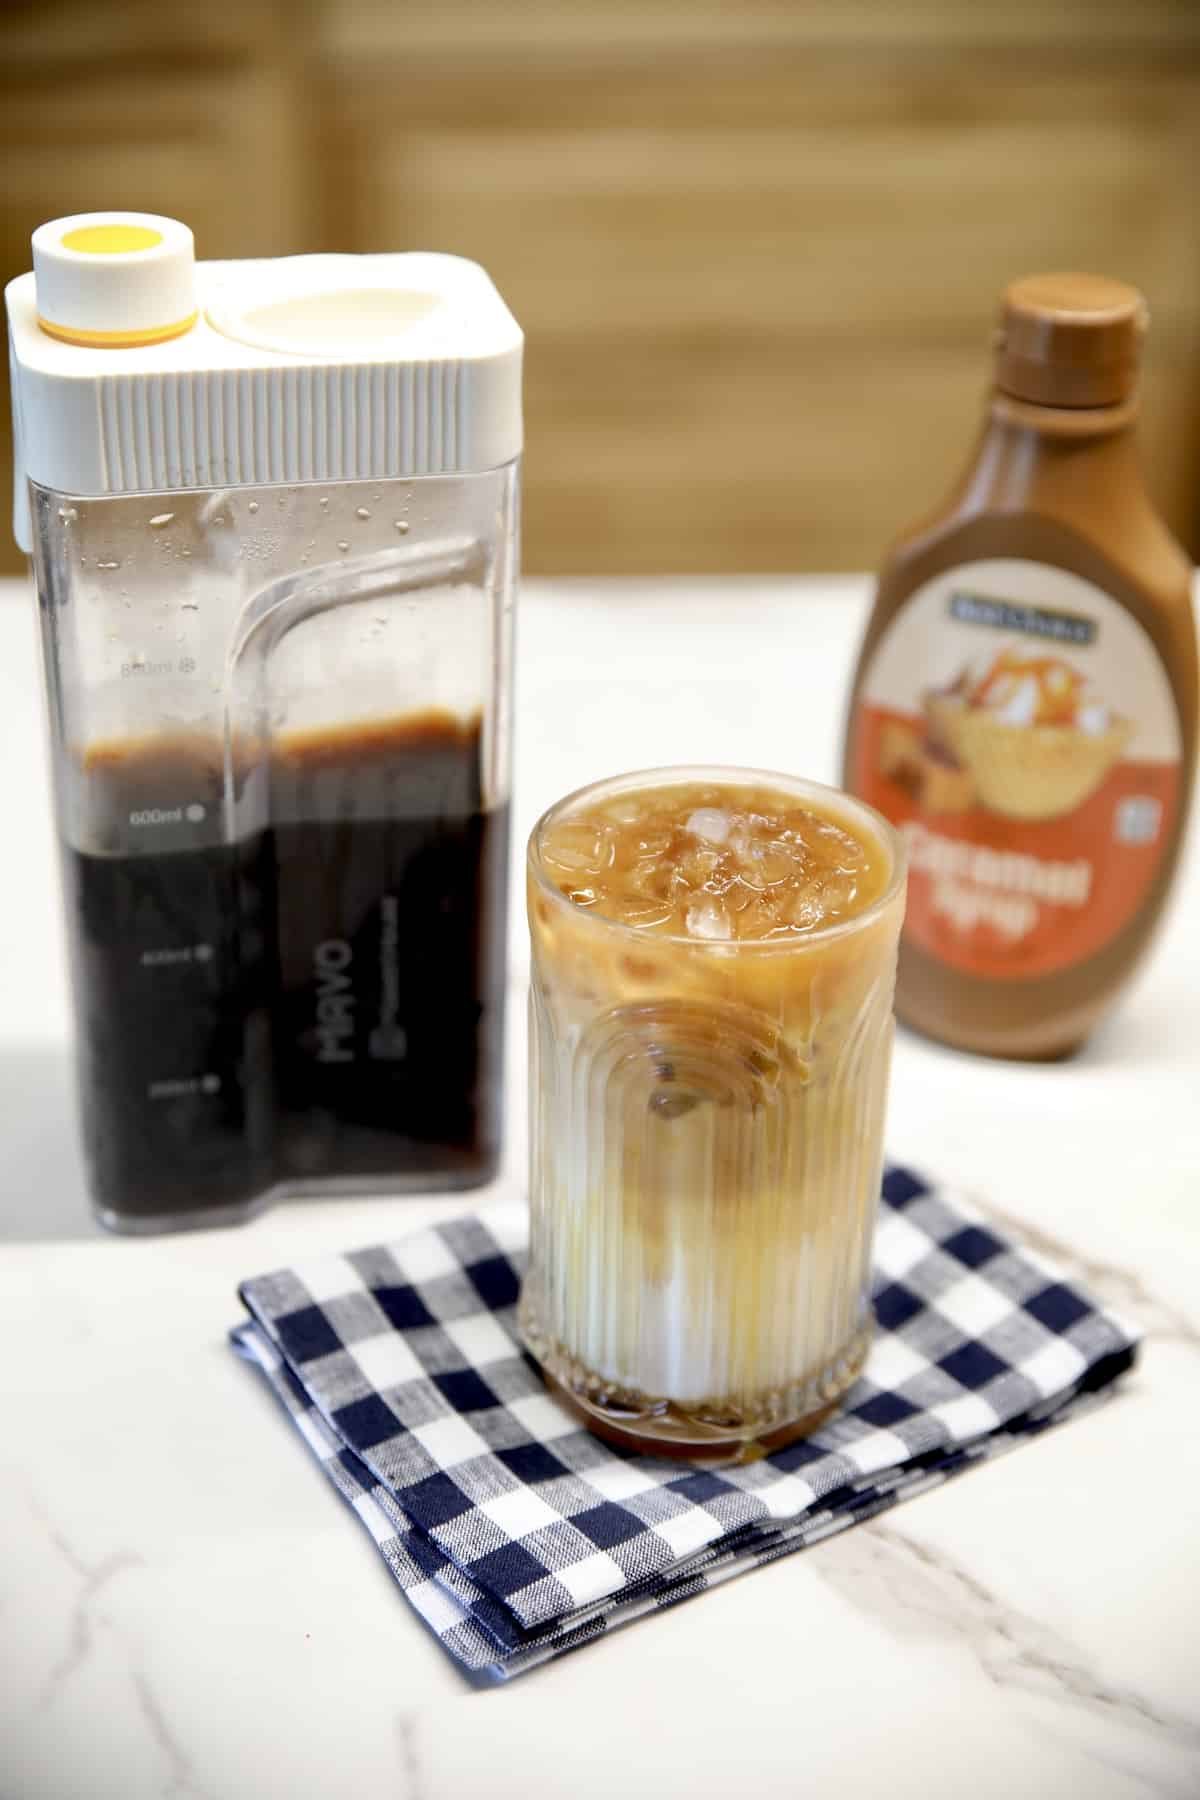 Cold brew coffee with caramel sauce and caramel macchiato in a glass.